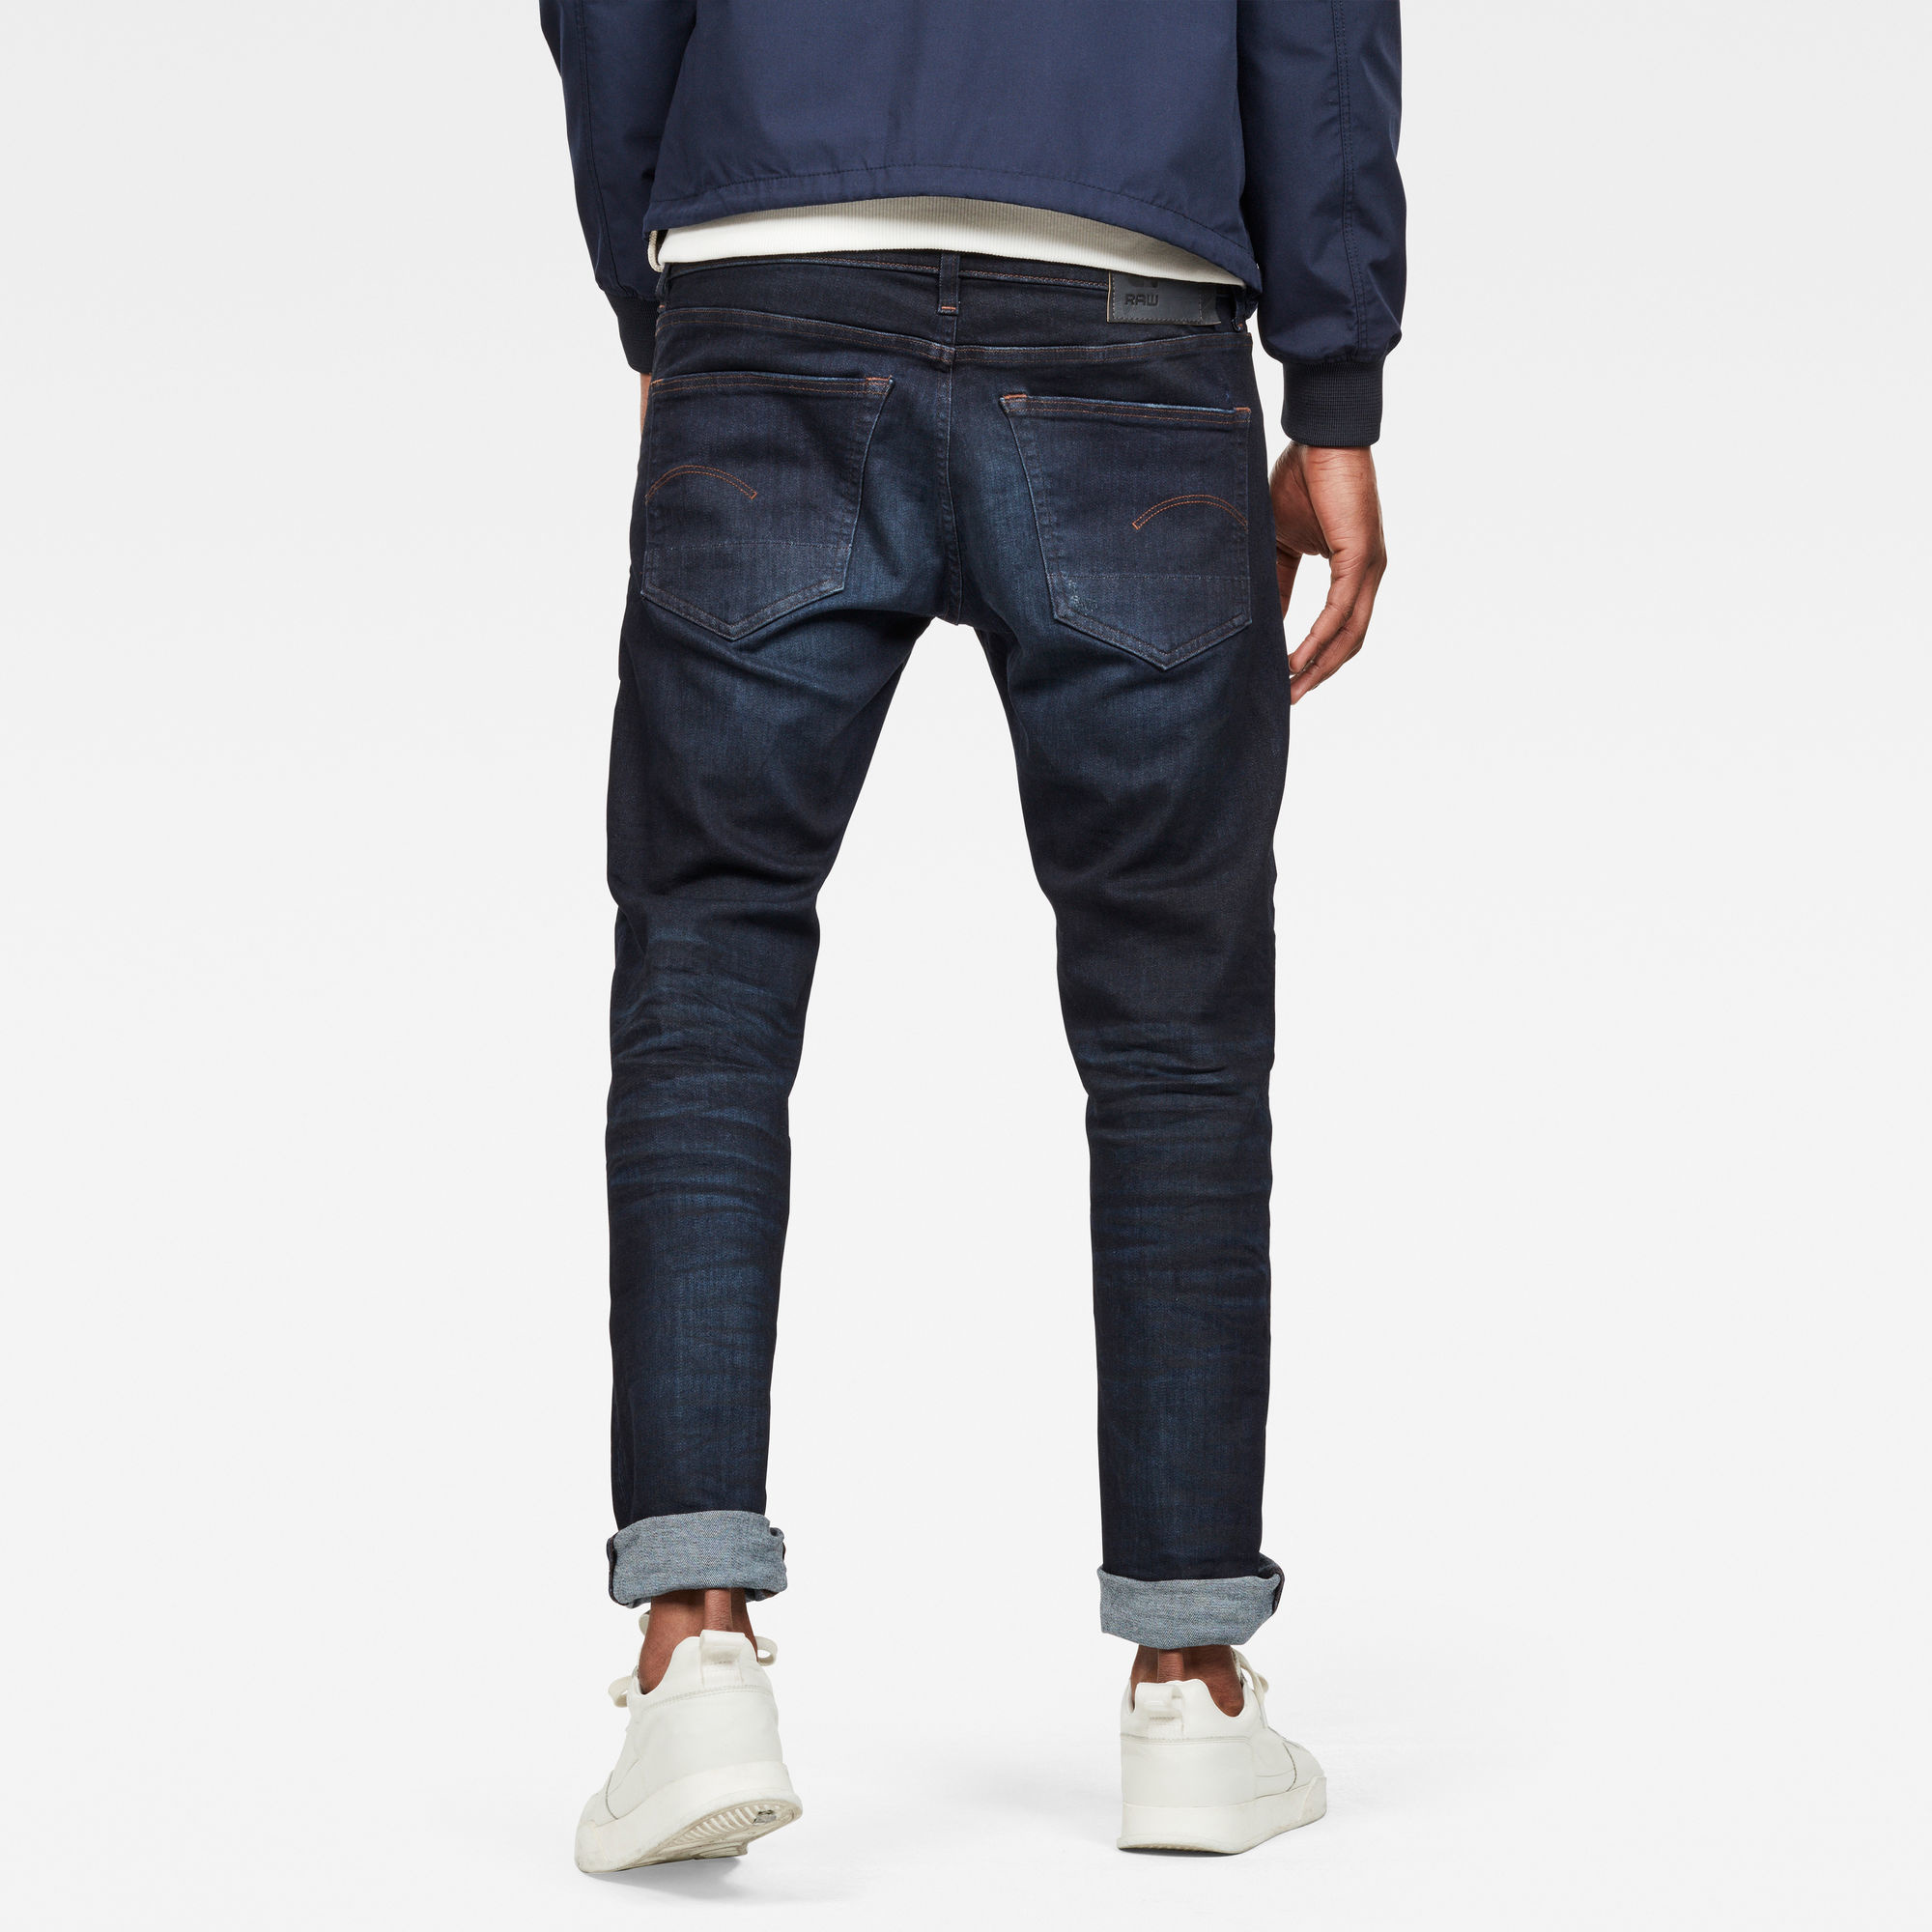 G-star Deconstructed - KING Jeans & Casuals